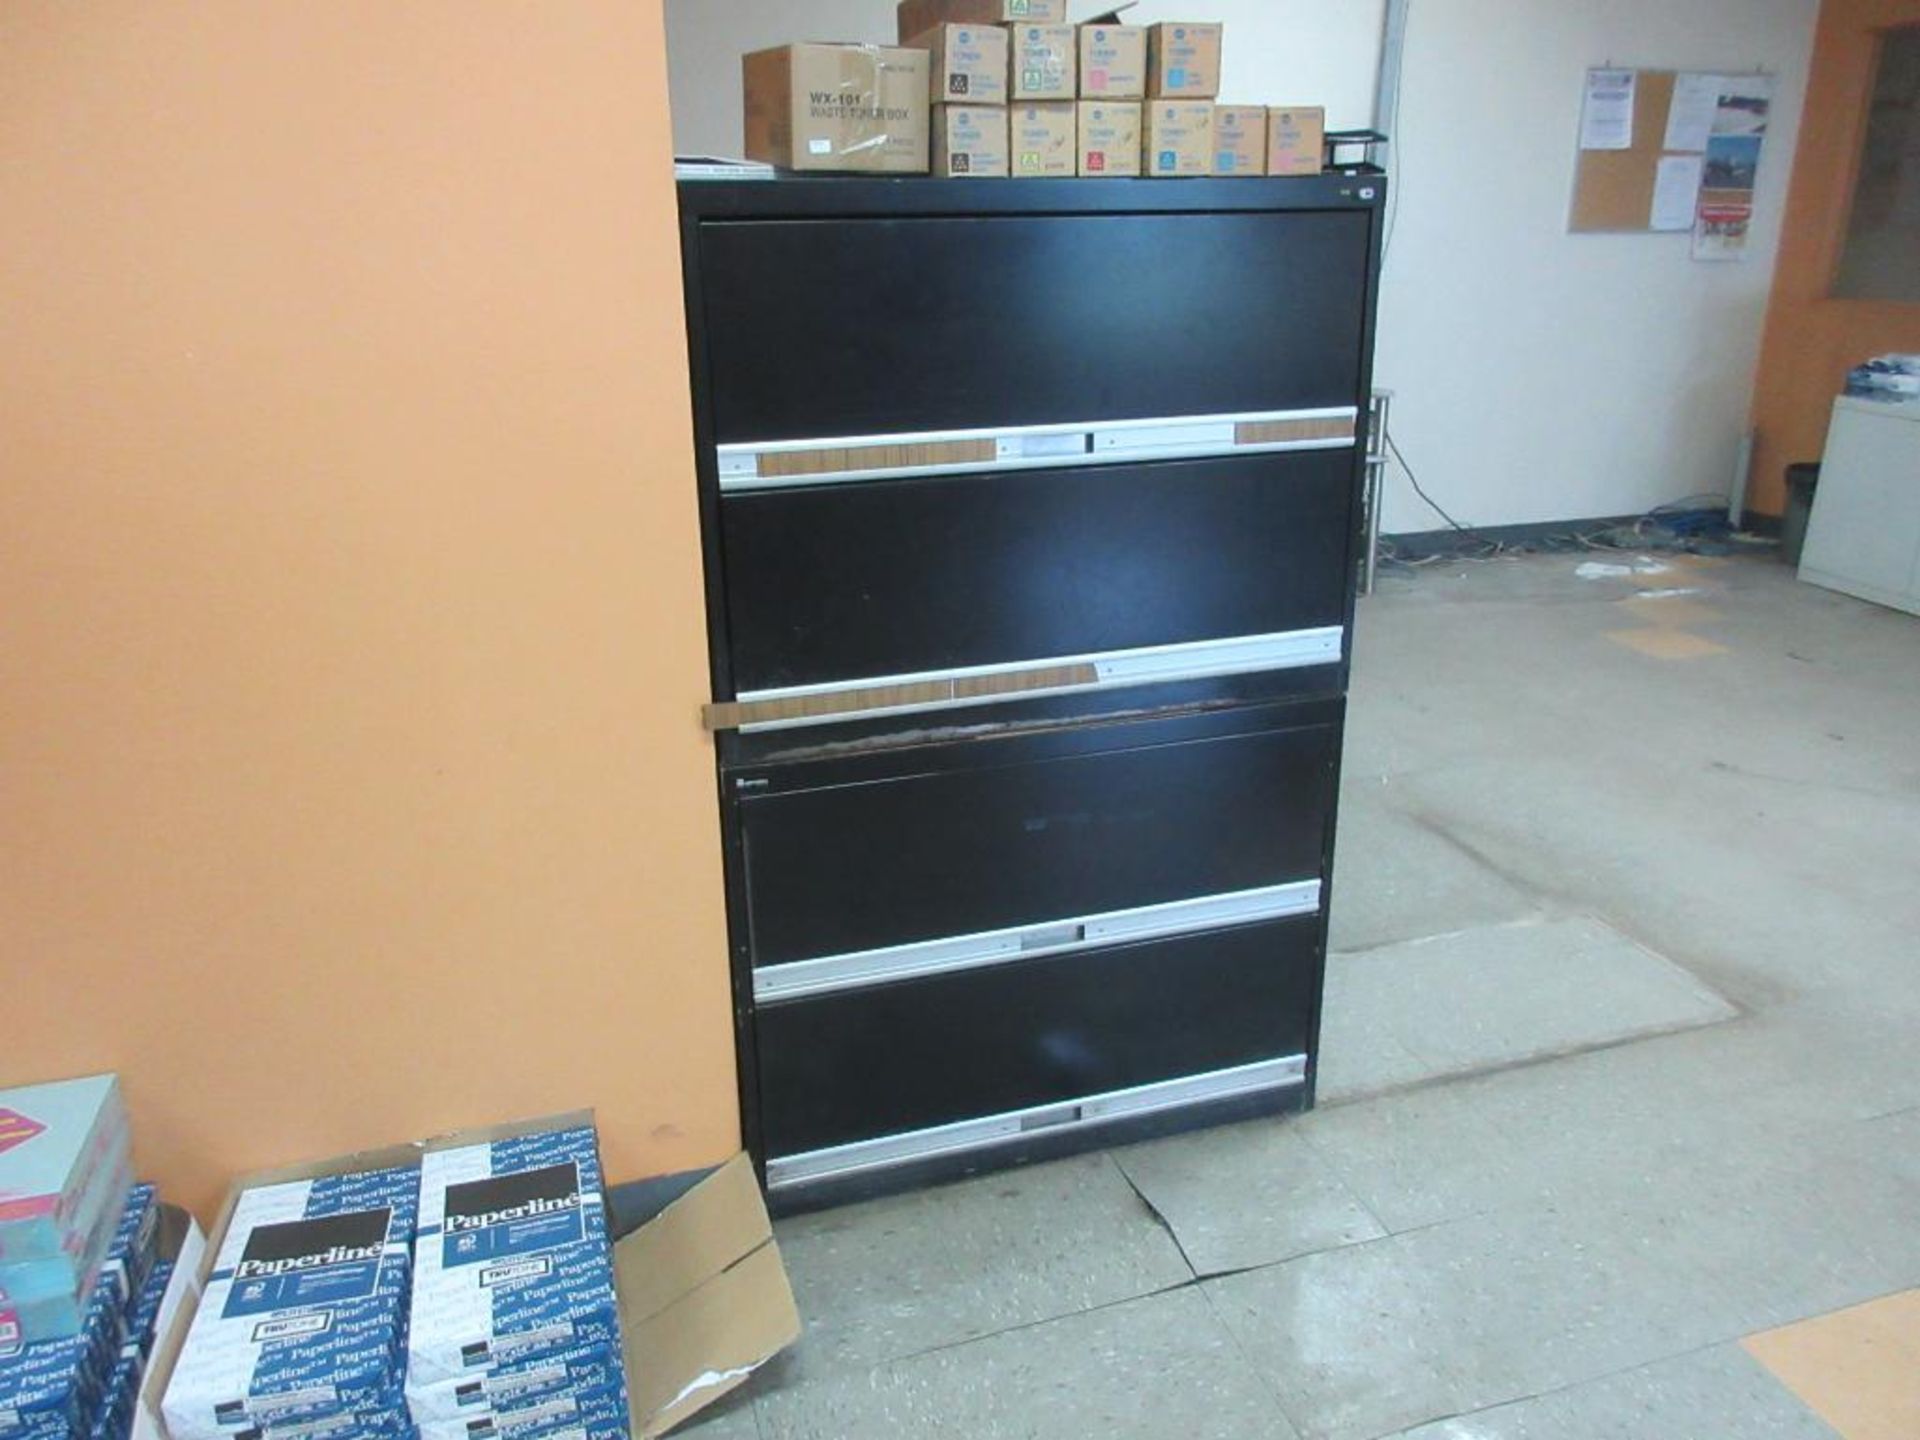 CONTENTS OF WORK AREA INCL 5 FILE CABINETS, 1 BLUEPRINT CABINET, 8 CHAIRS, 1 STAINLESS TABLE, 3 BOOK - Image 10 of 16